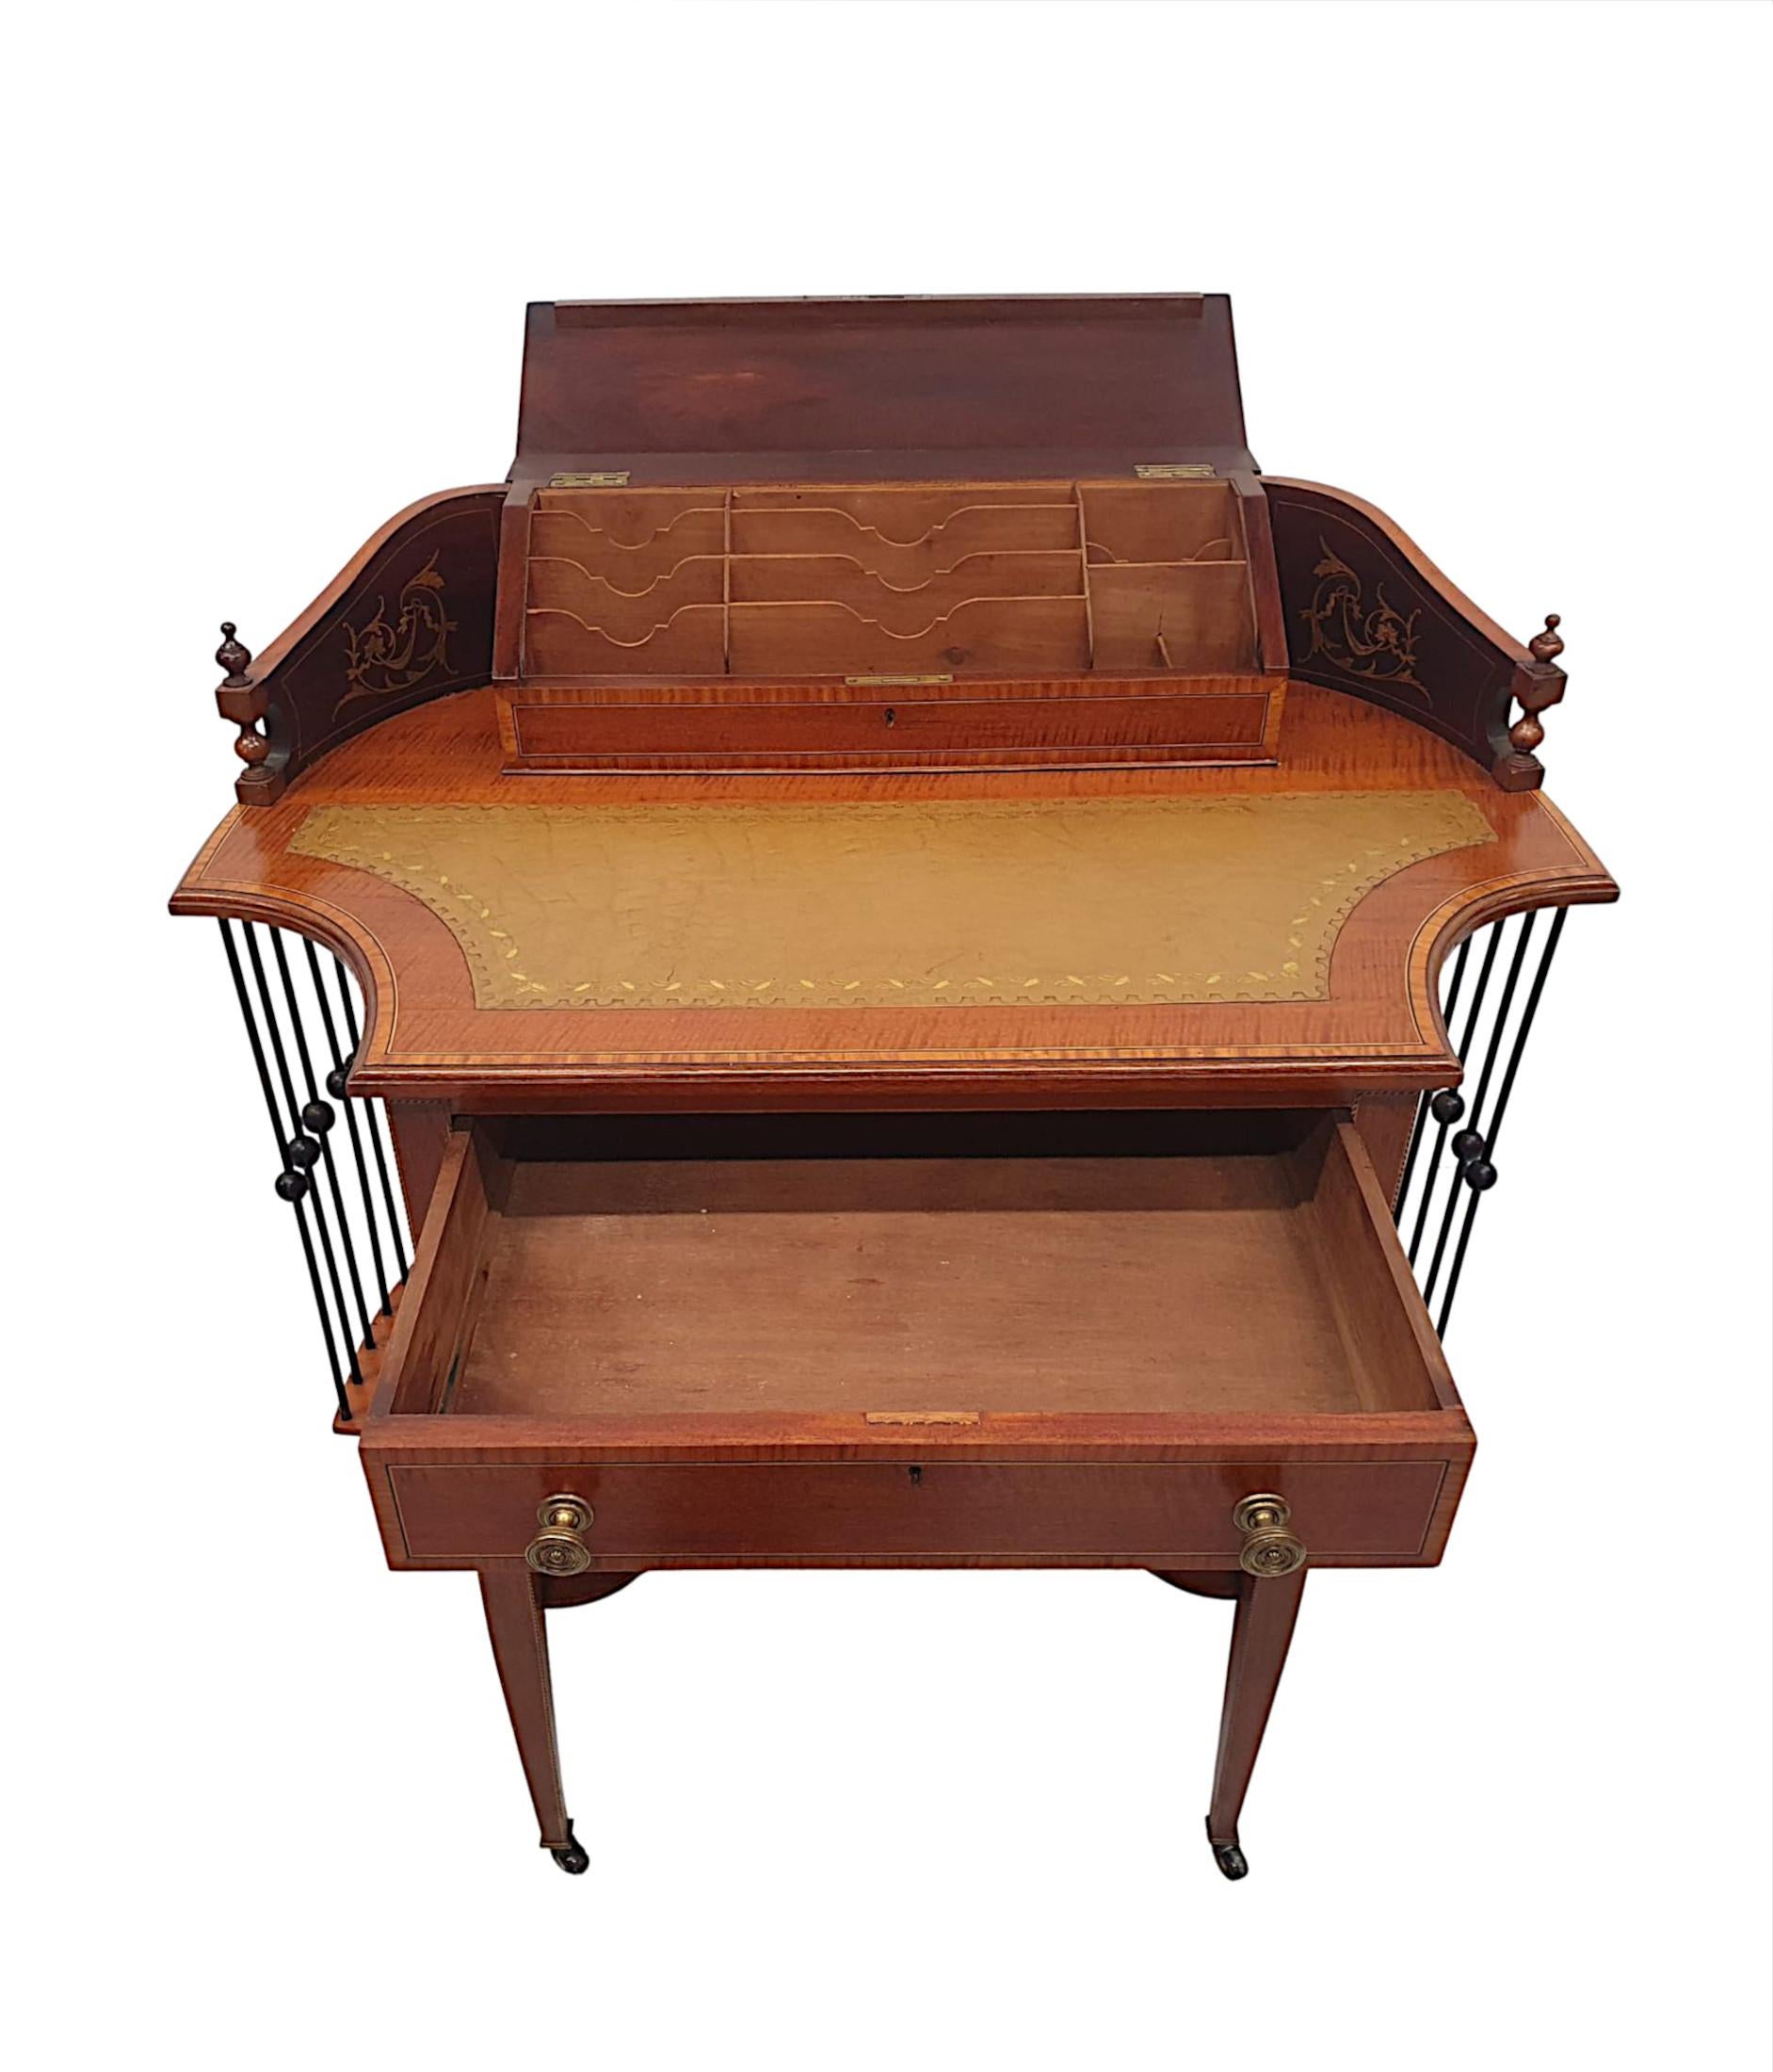 20th Century Fine and Unusual Edwardian Inlaid Leather Top Desk For Sale